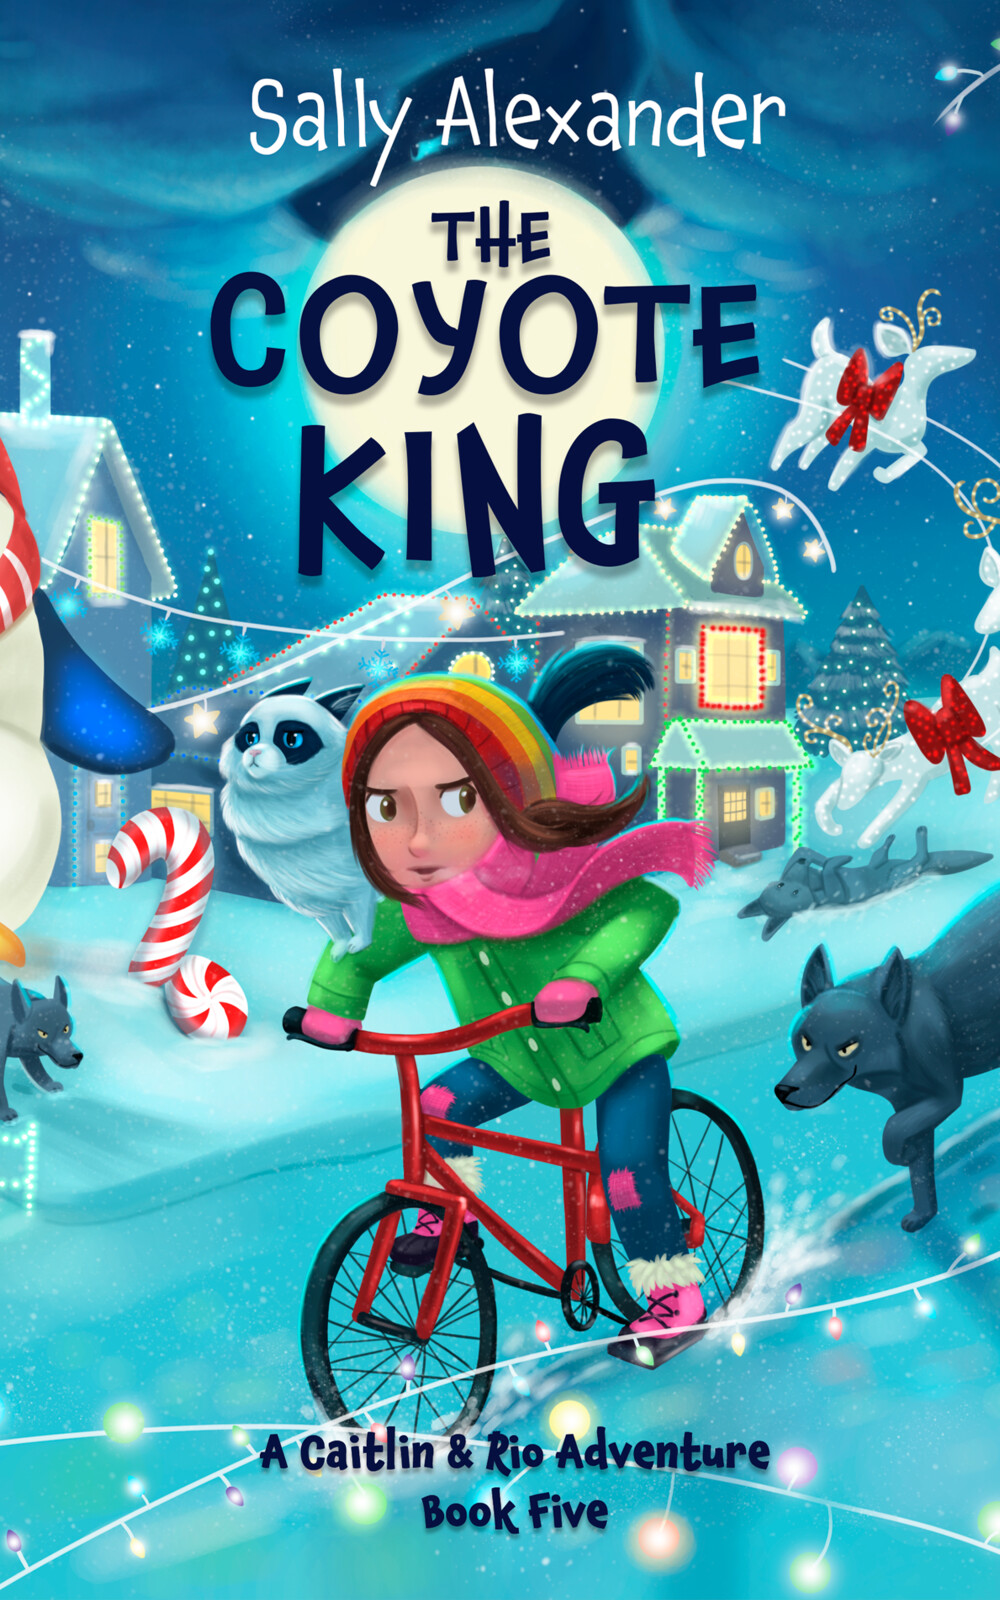 Book 5 - The Coyote King - Front Cover illustration